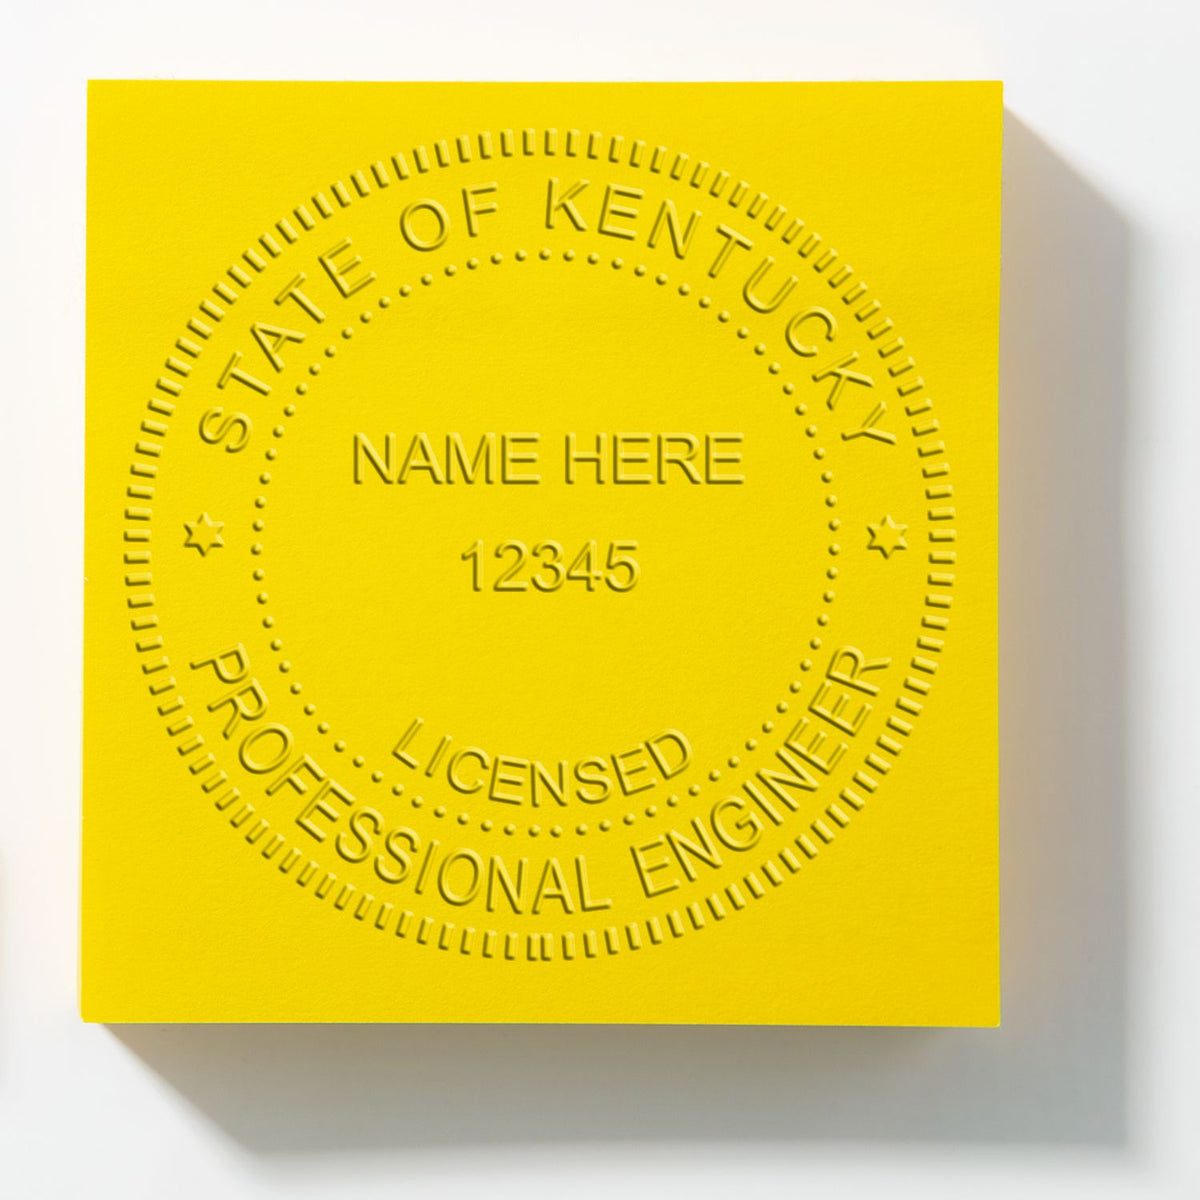 An alternative view of the Hybrid Kentucky Engineer Seal stamped on a sheet of paper showing the image in use